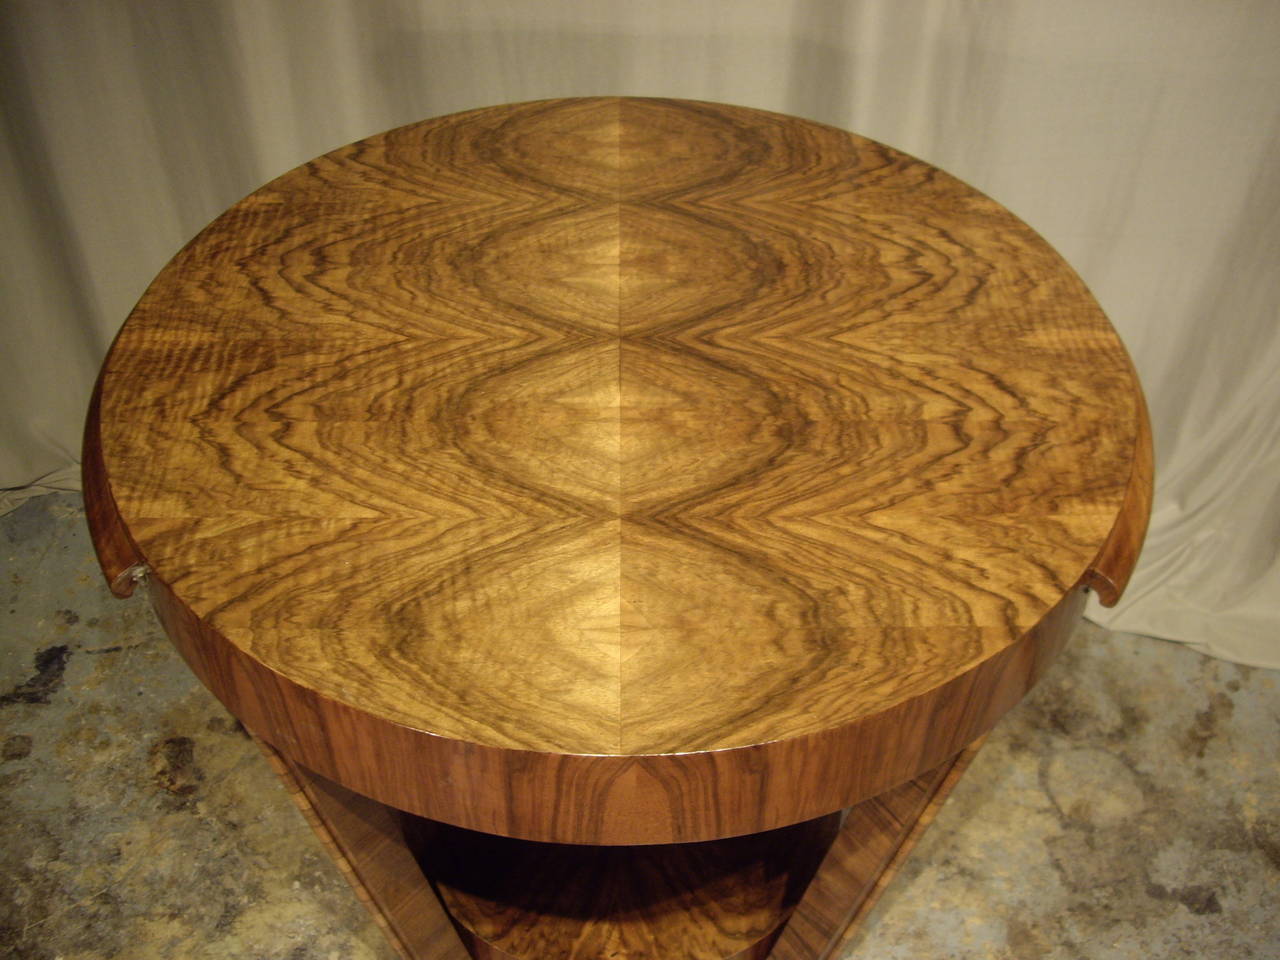 Beautiful veneered round Art Deco table with side slides that pull-out for drinks. Carefully restored and French polished. Would make a wonderful center hall table.